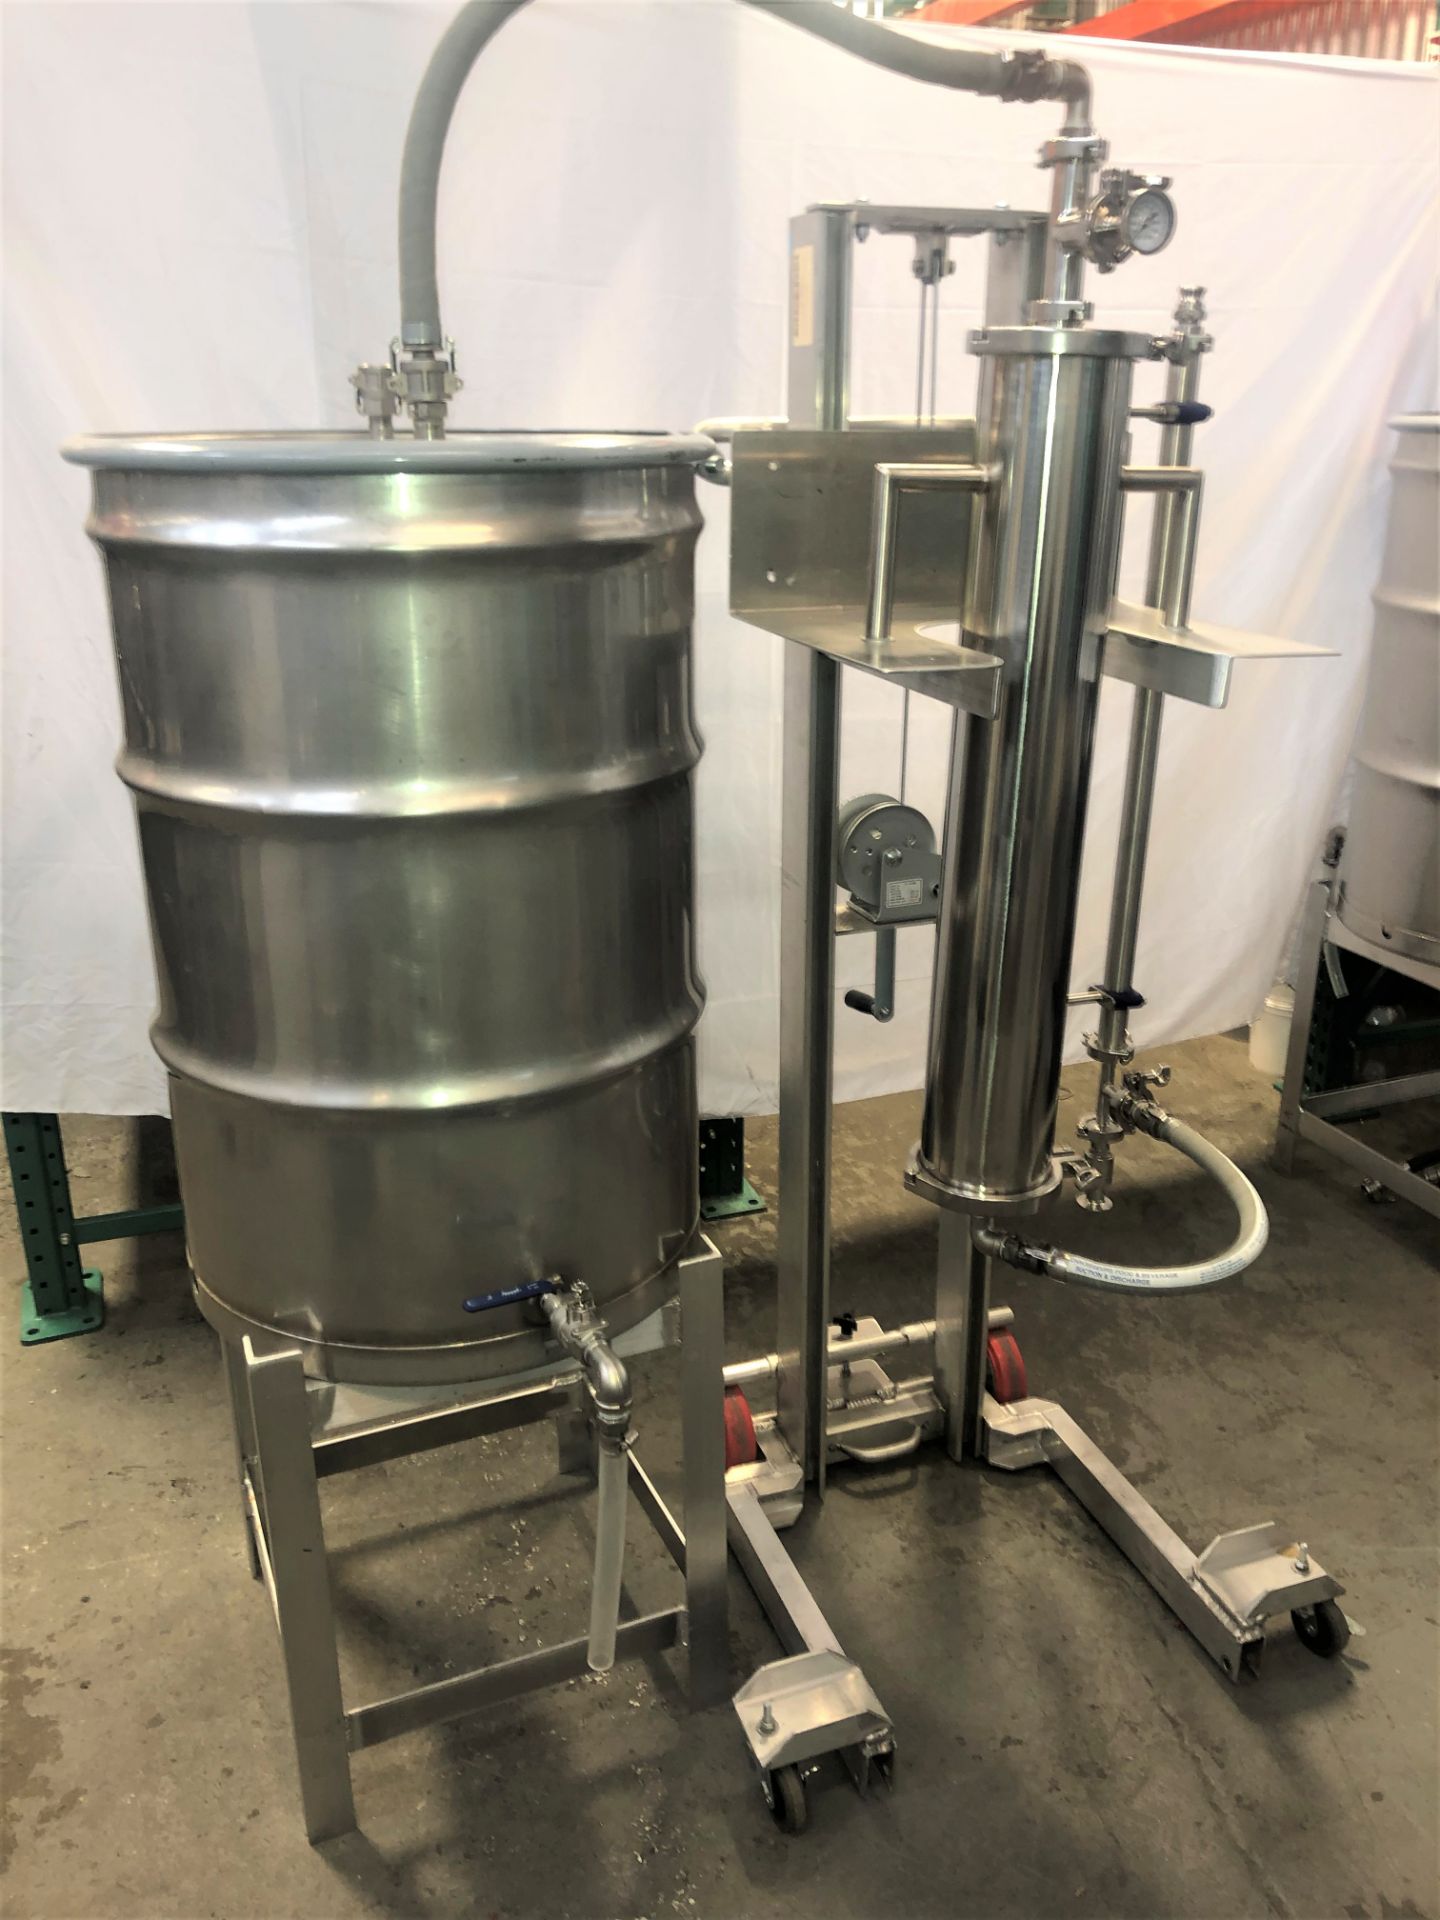 Used/Refurbished-CRCfilters Ethanol Dehydration System EDH-25. 25lb capacity 55 gal collection drum. - Image 2 of 6